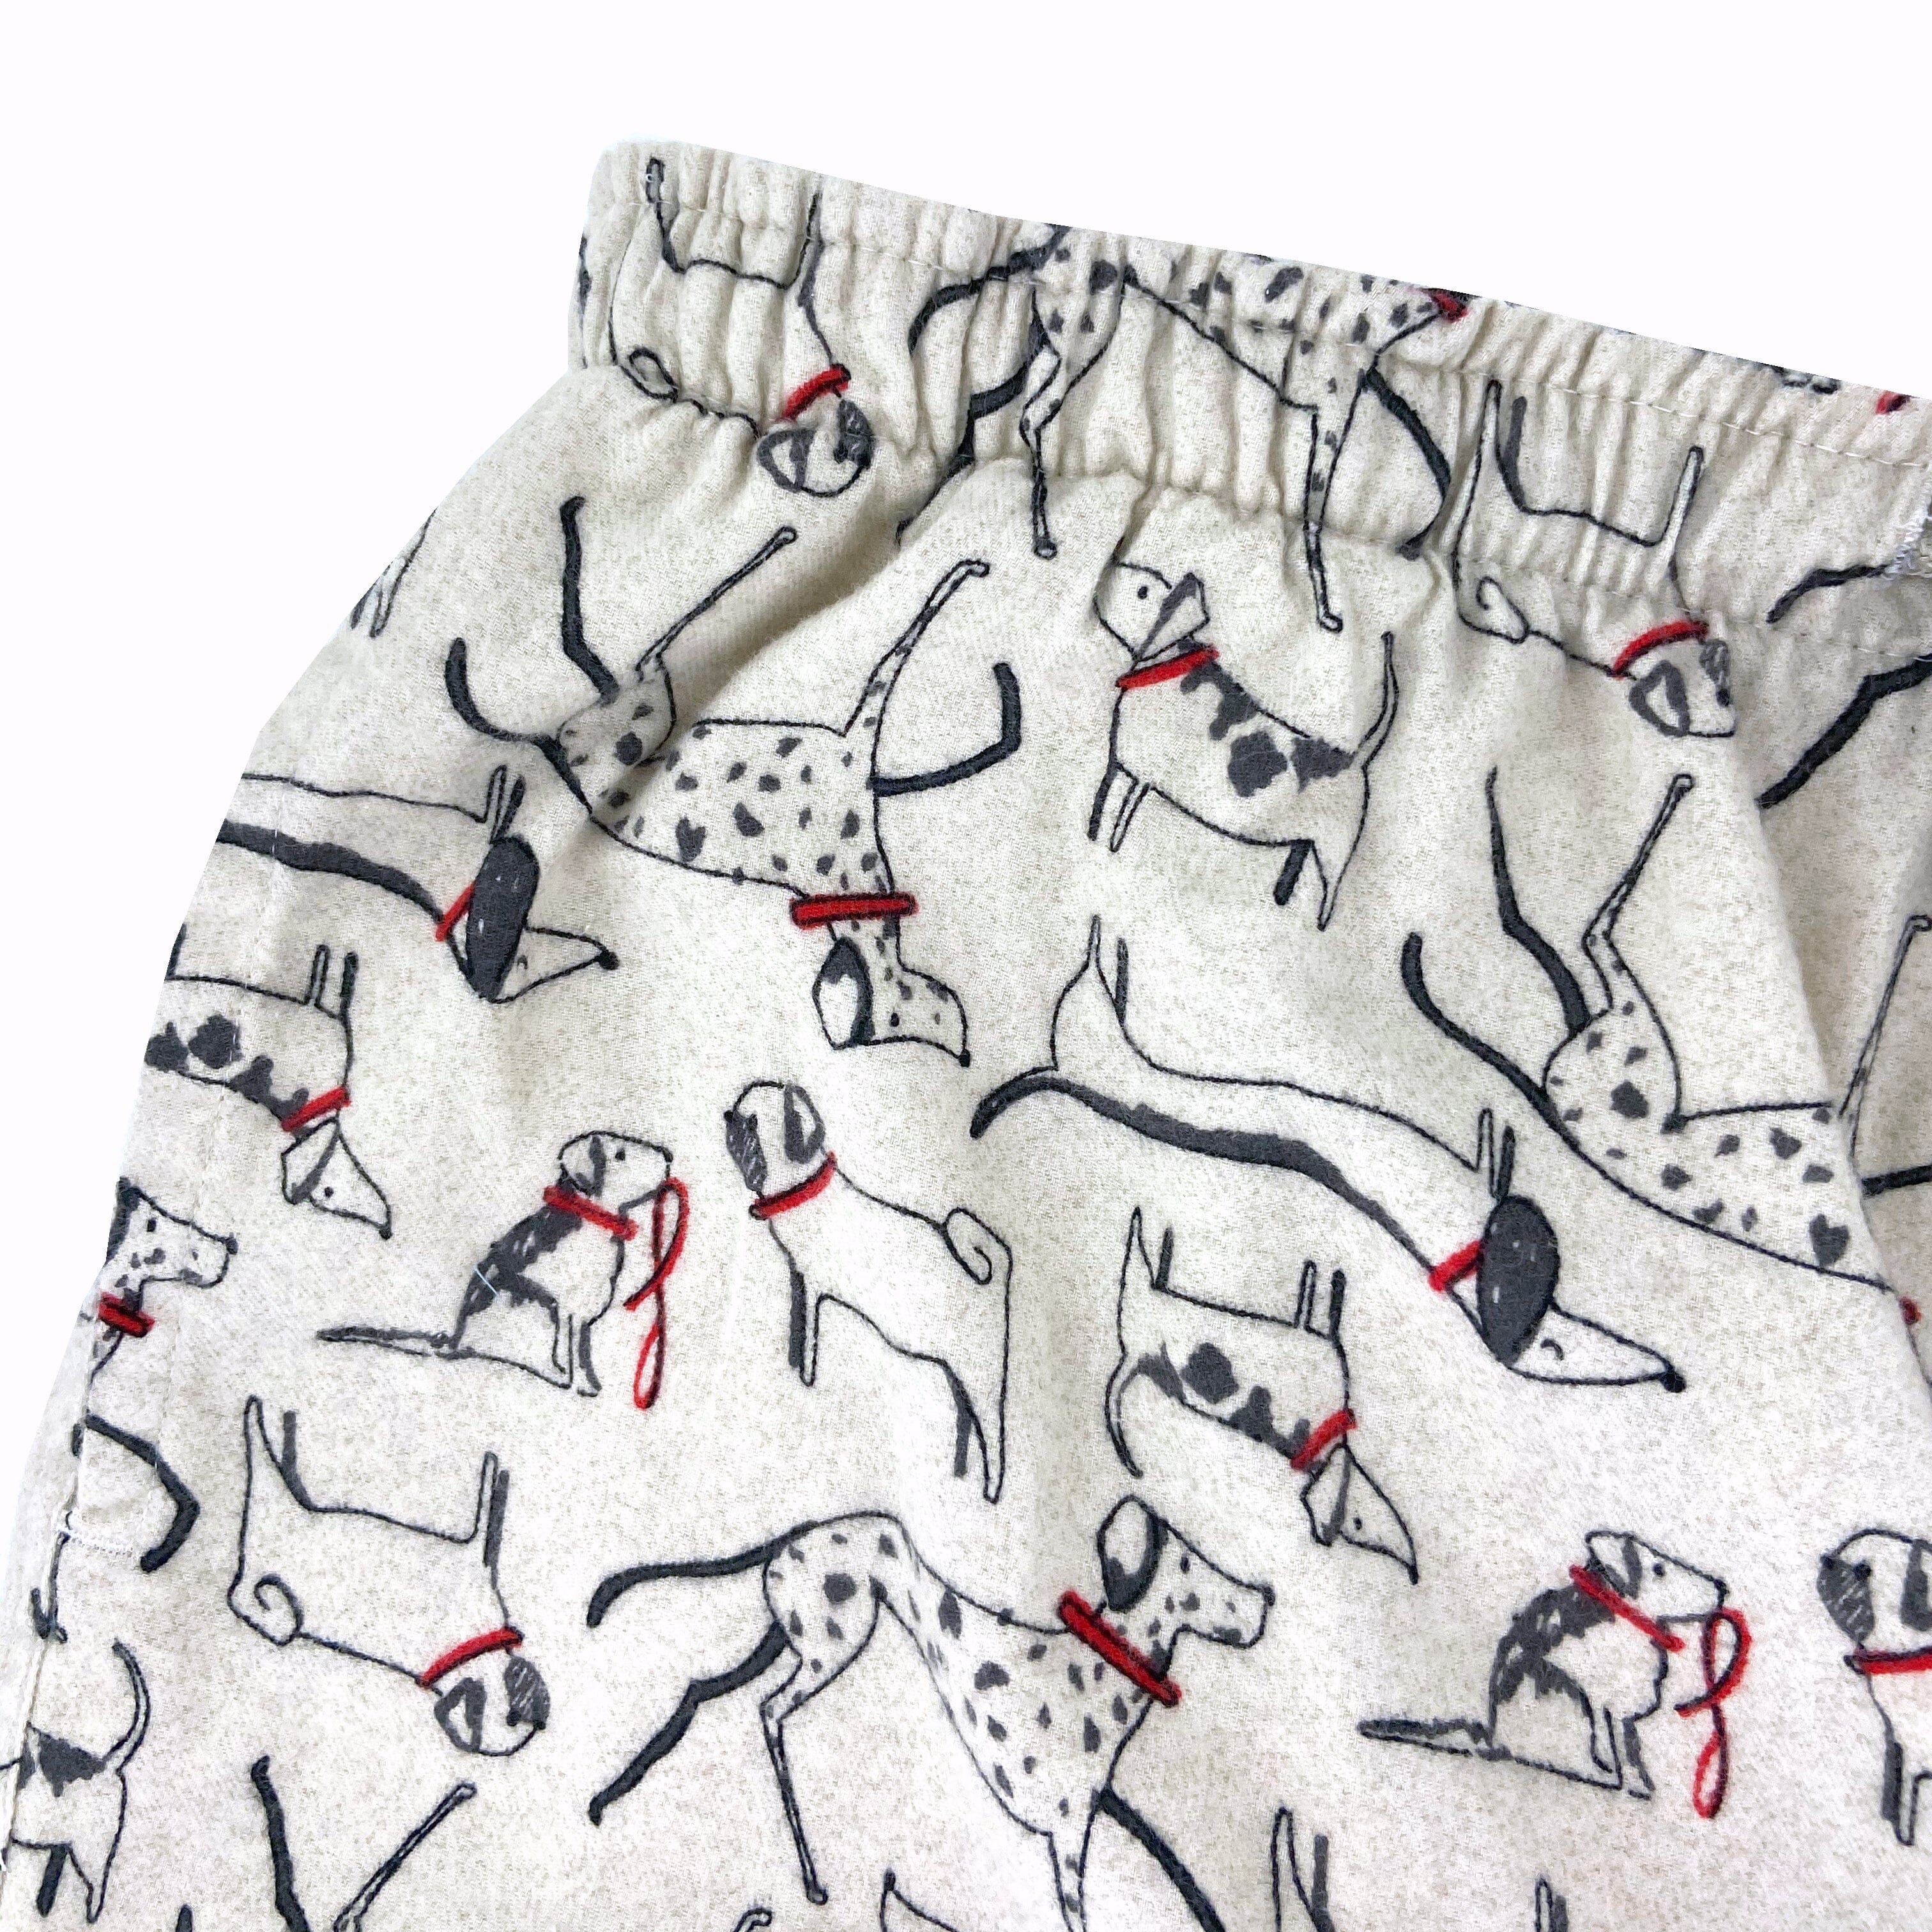 Men's Soft Comfy Grey Flannel Pajama Bottoms with Dog Printed Pattern